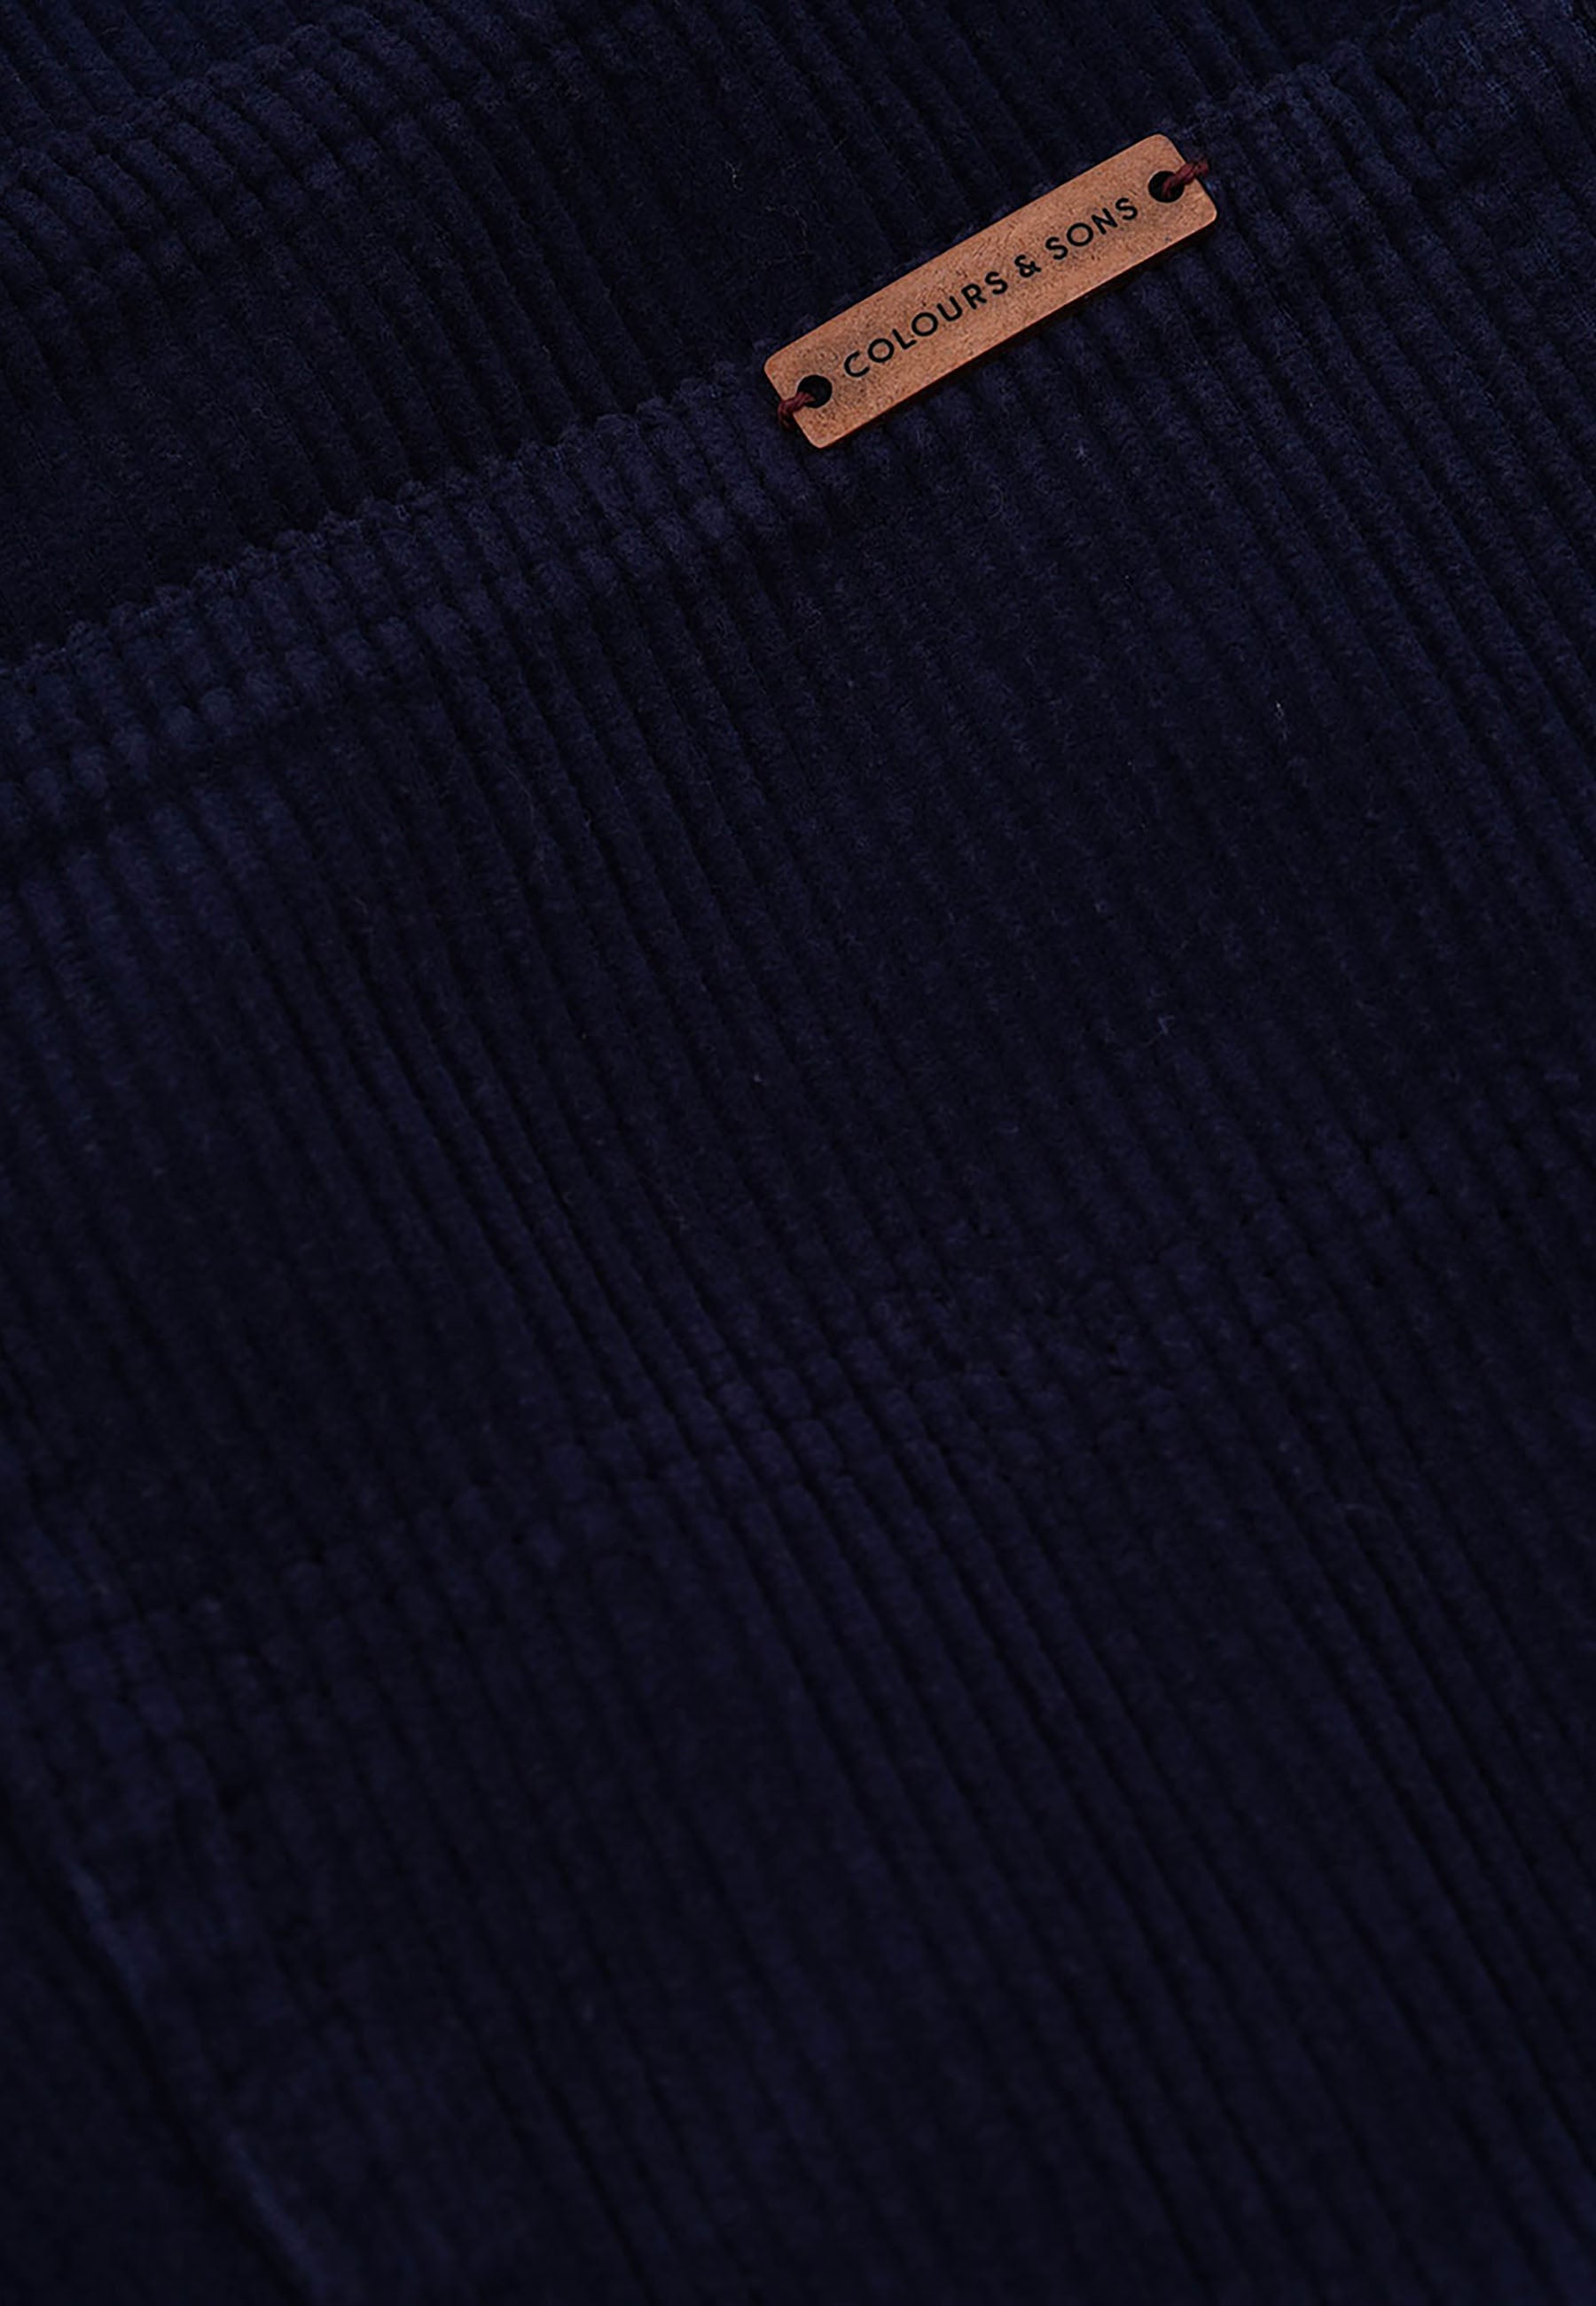 Pants-Corduroy in Navy Hosen Colours and Sons   